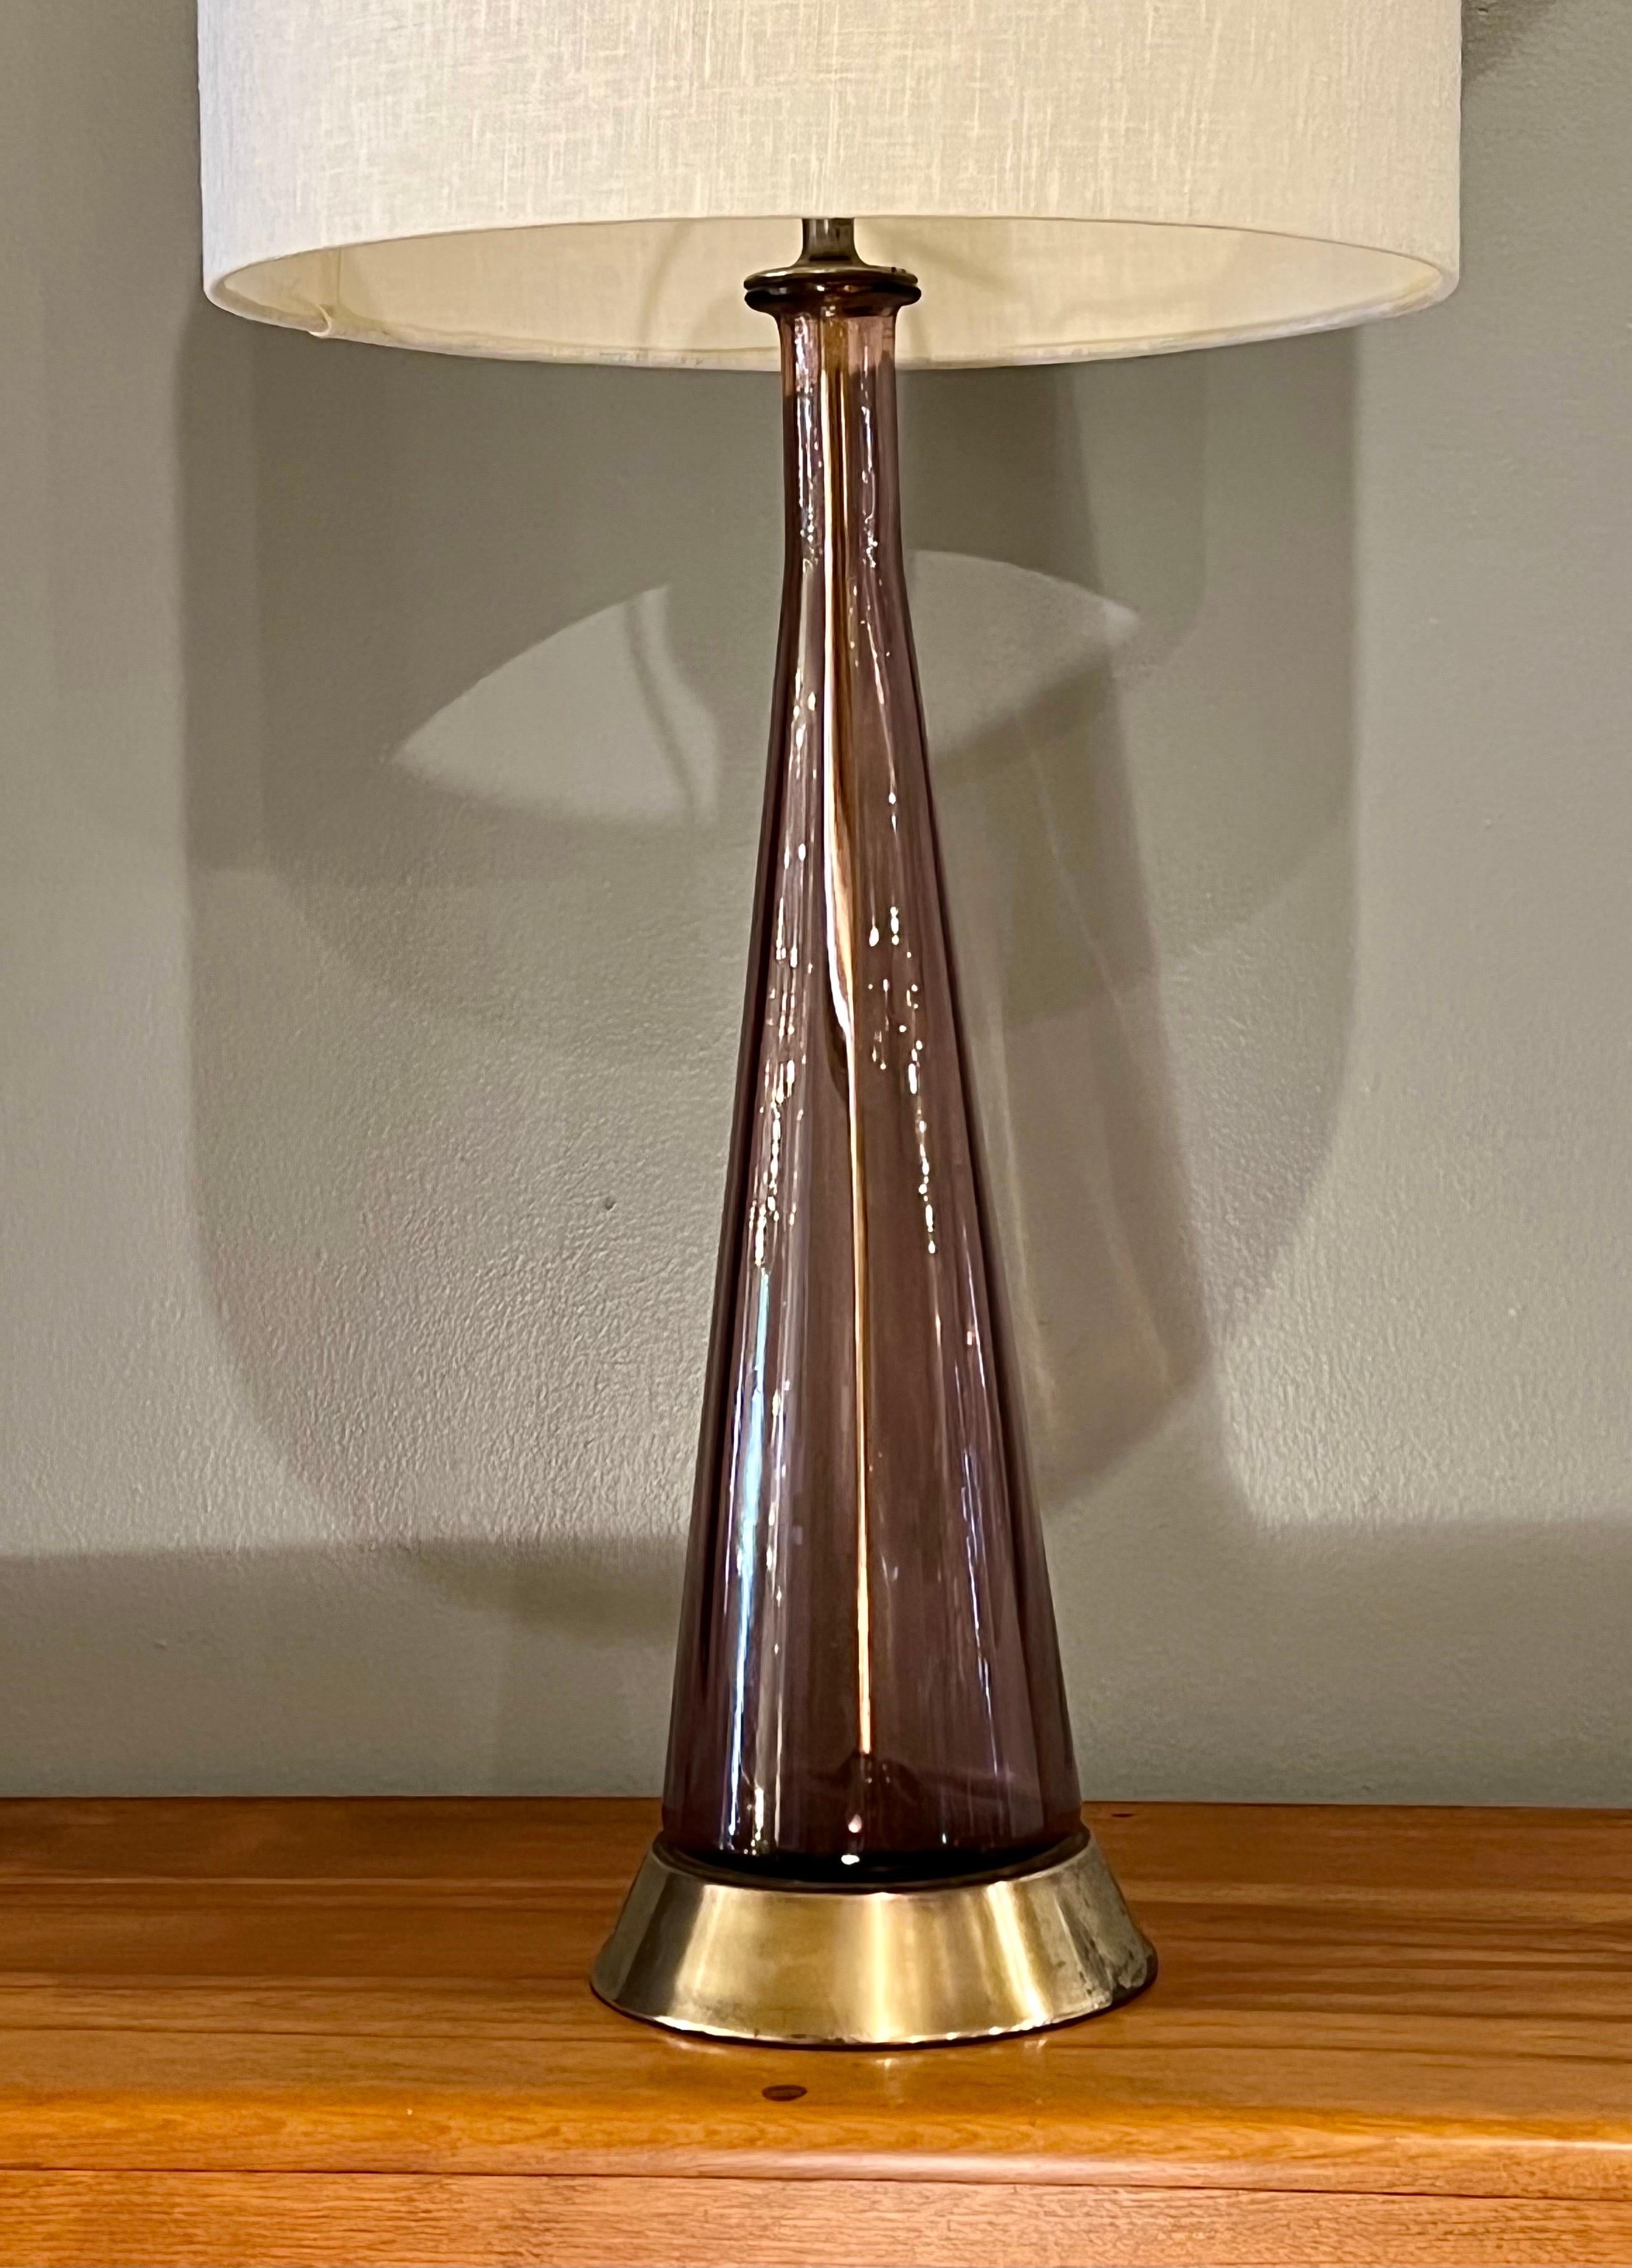 Beautiful midcentury, glass table lamp in purple glass lampshade not included, perfect working condition, 24.5